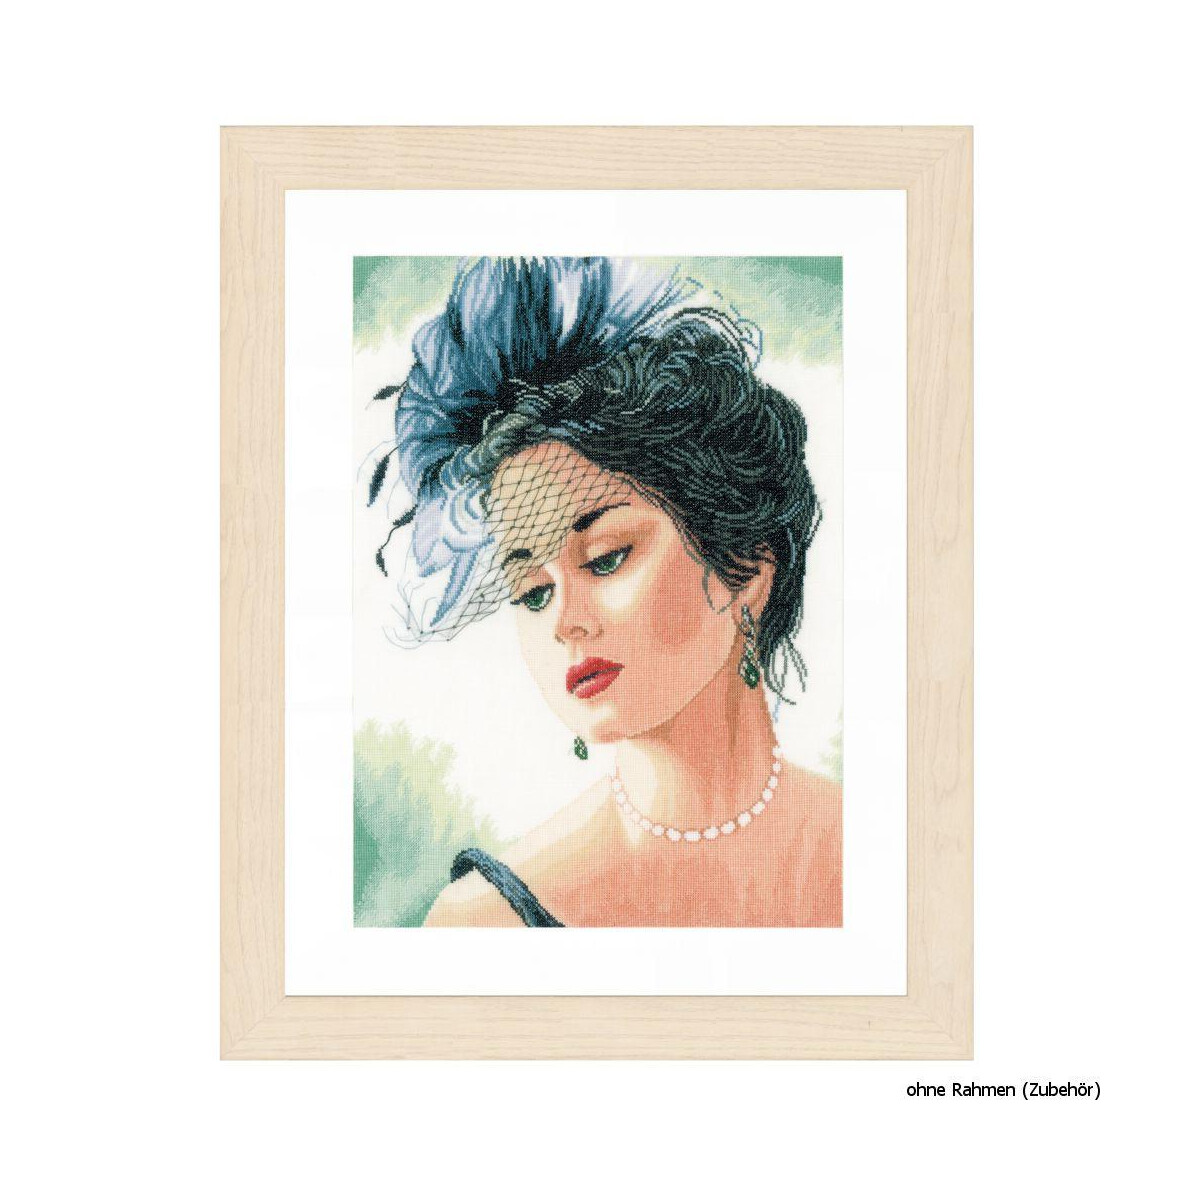 A framed portrait of a woman in a vintage style...